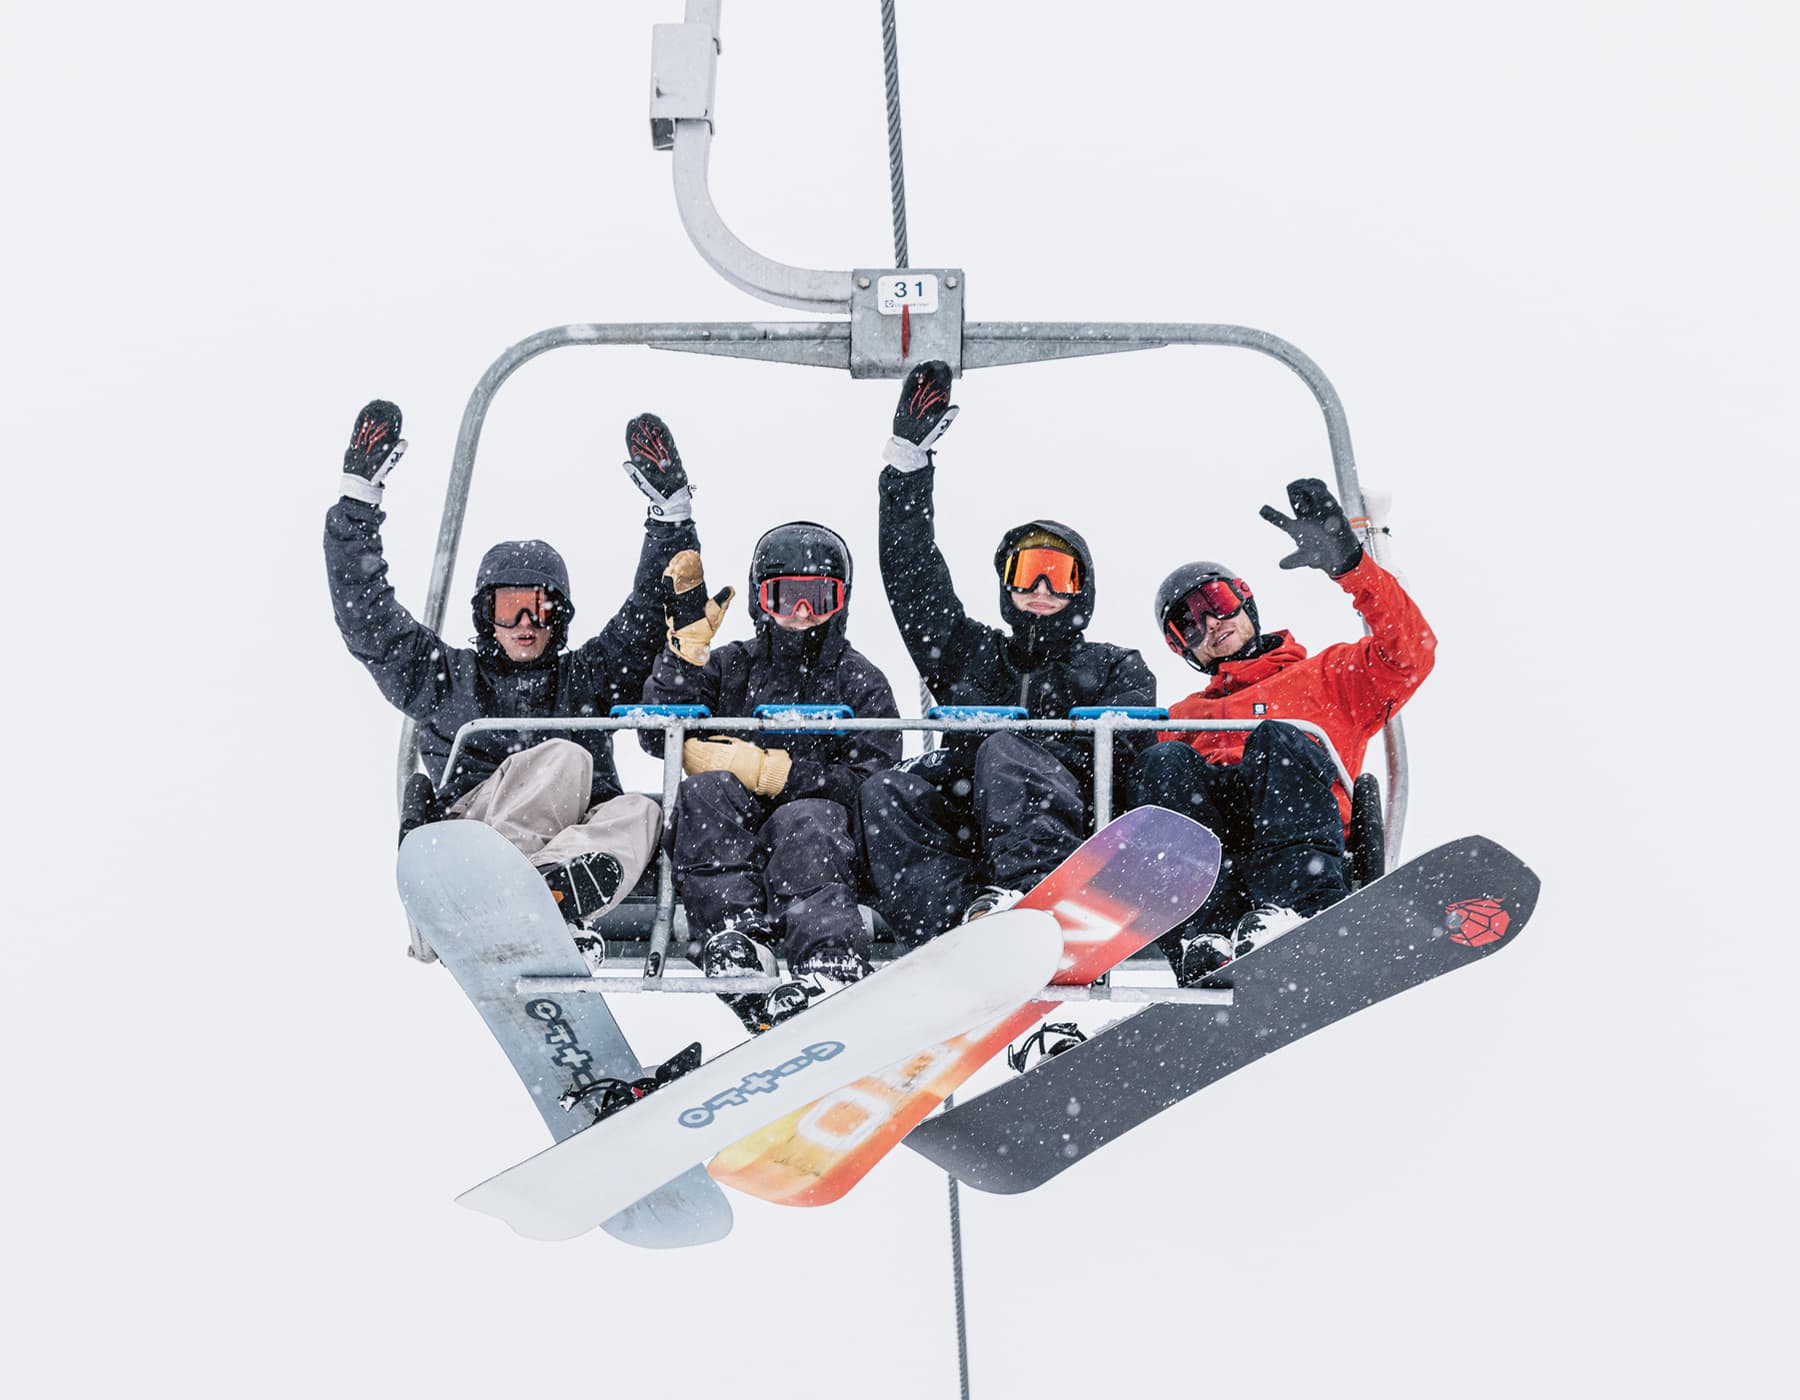 Four snowboarders sitting on a chairlift, with Nitro snowboards strapped to one foot. It is snowing and behind them is white sky. They are waving at the camera below them.